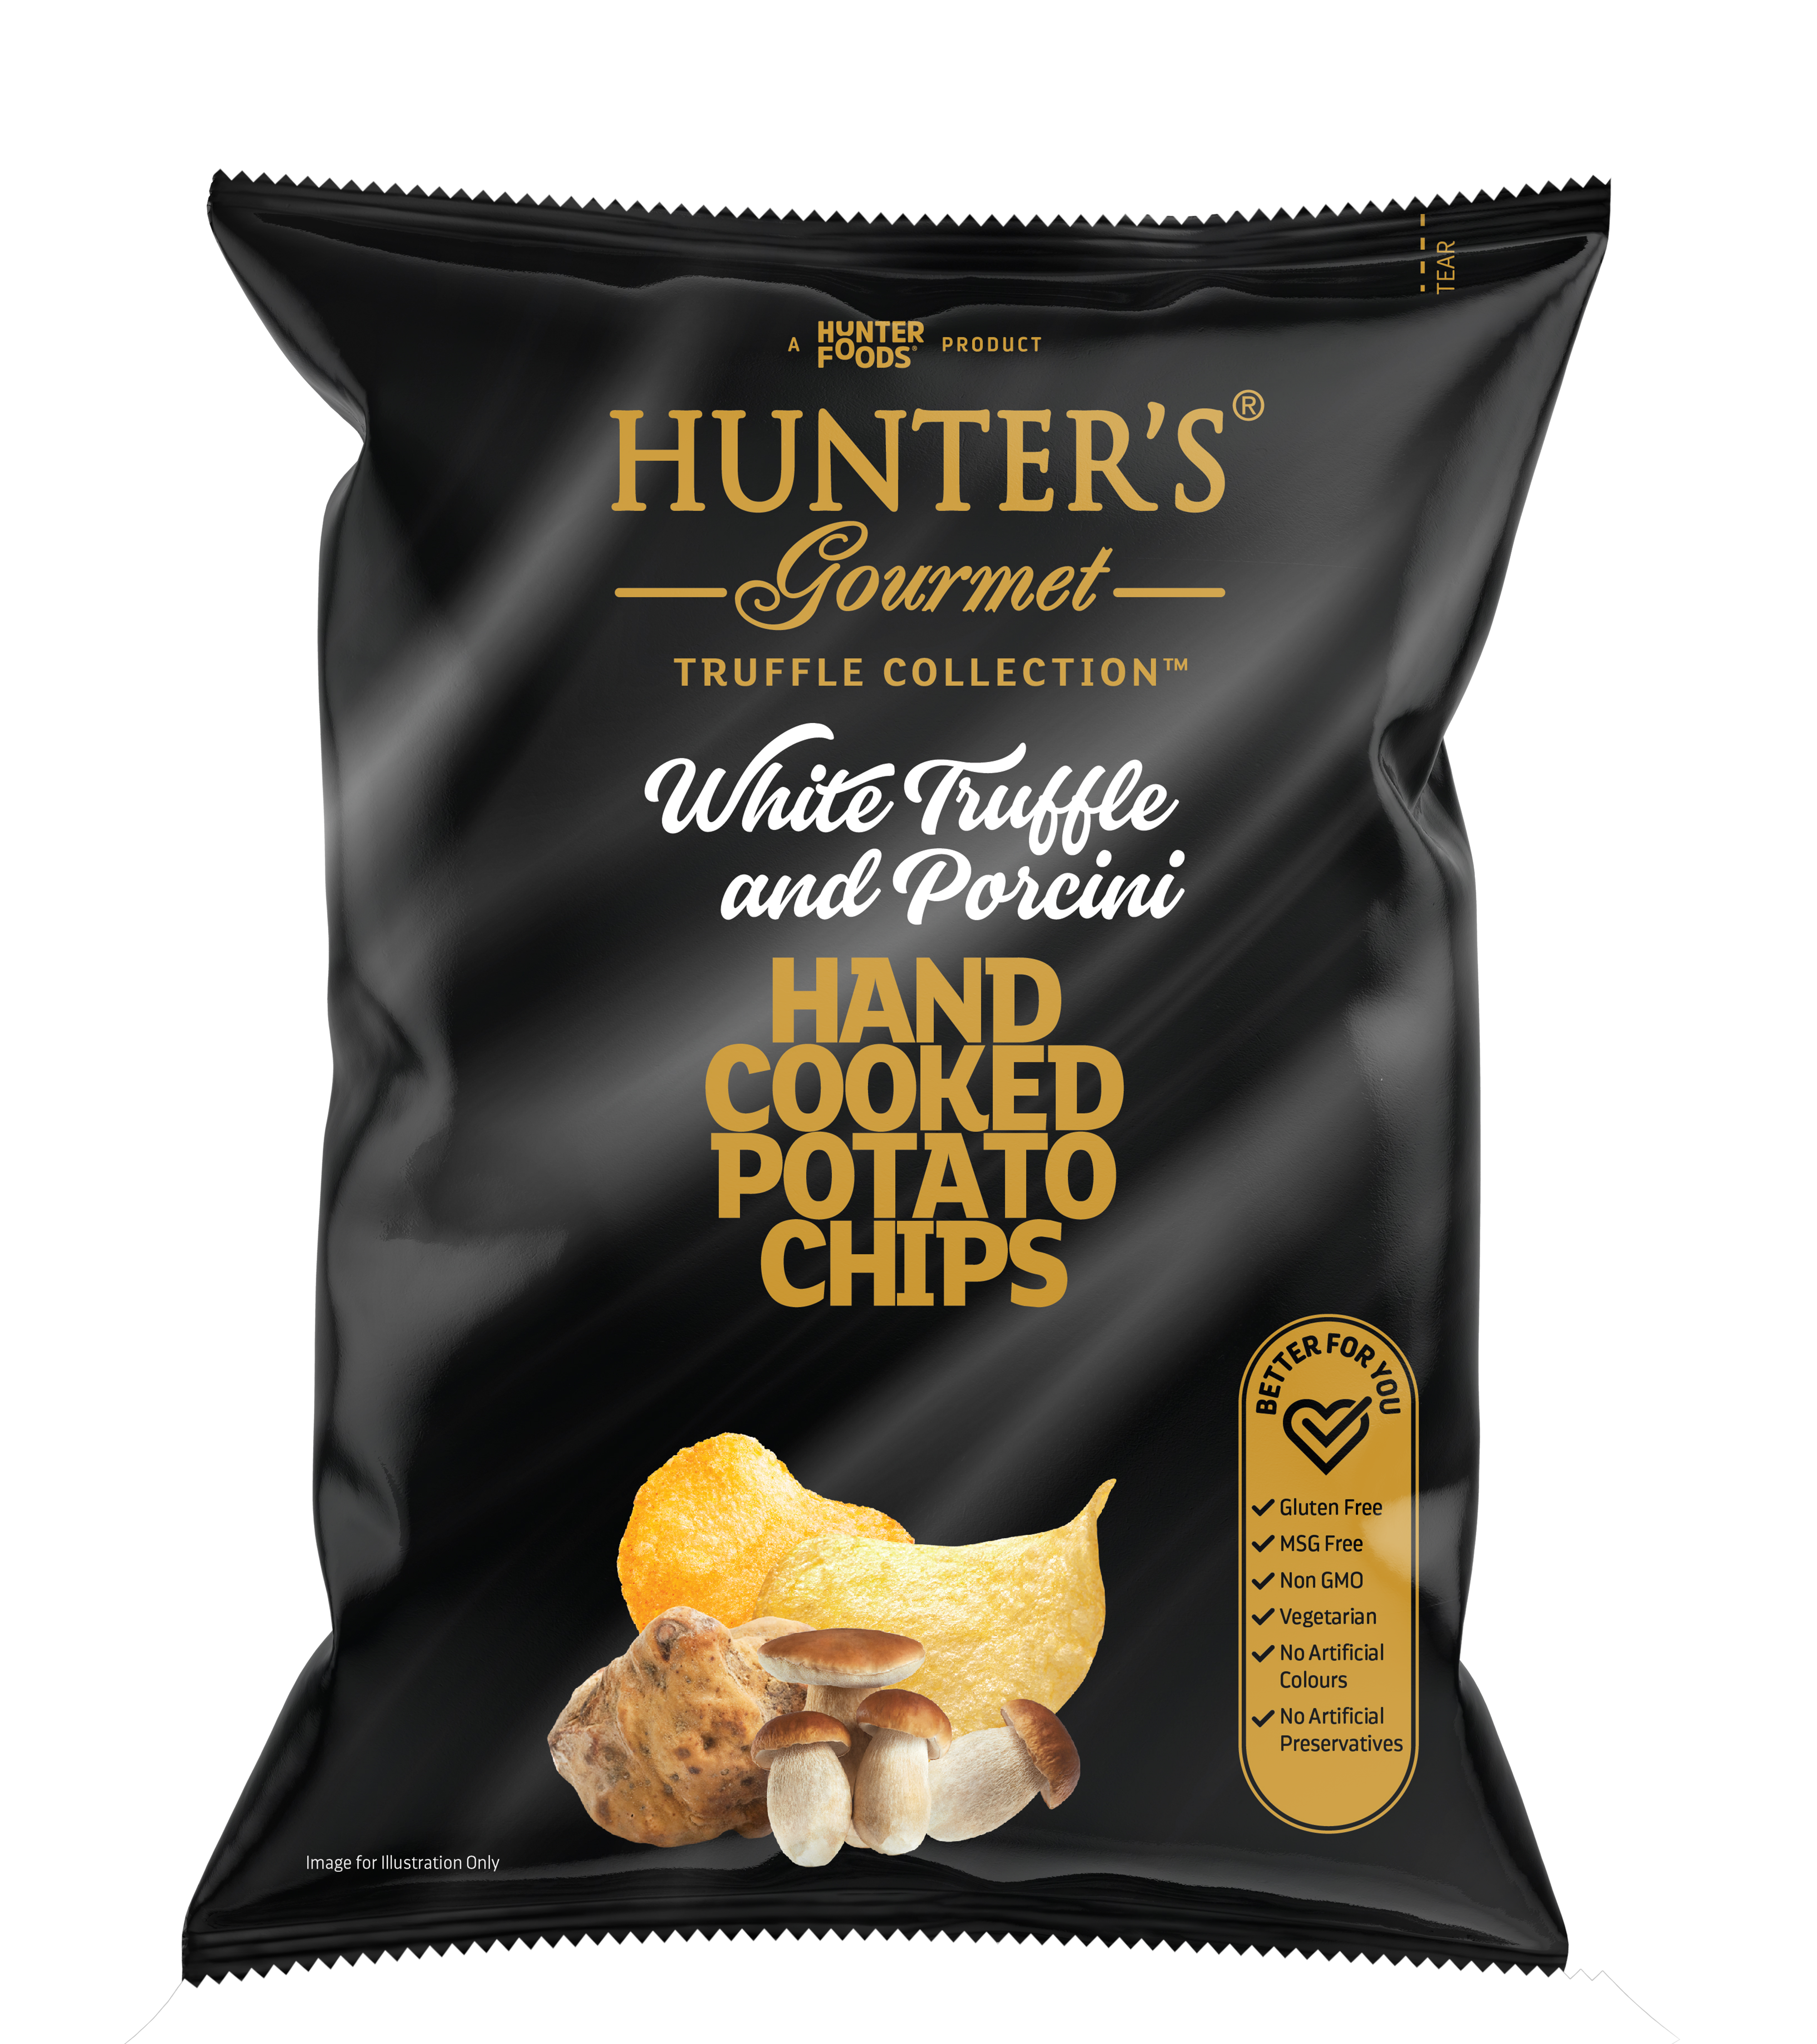 Hunter's Gourmet Hand Cooked Potato Chips White Truffle and Porcini 12 units per case 125 g